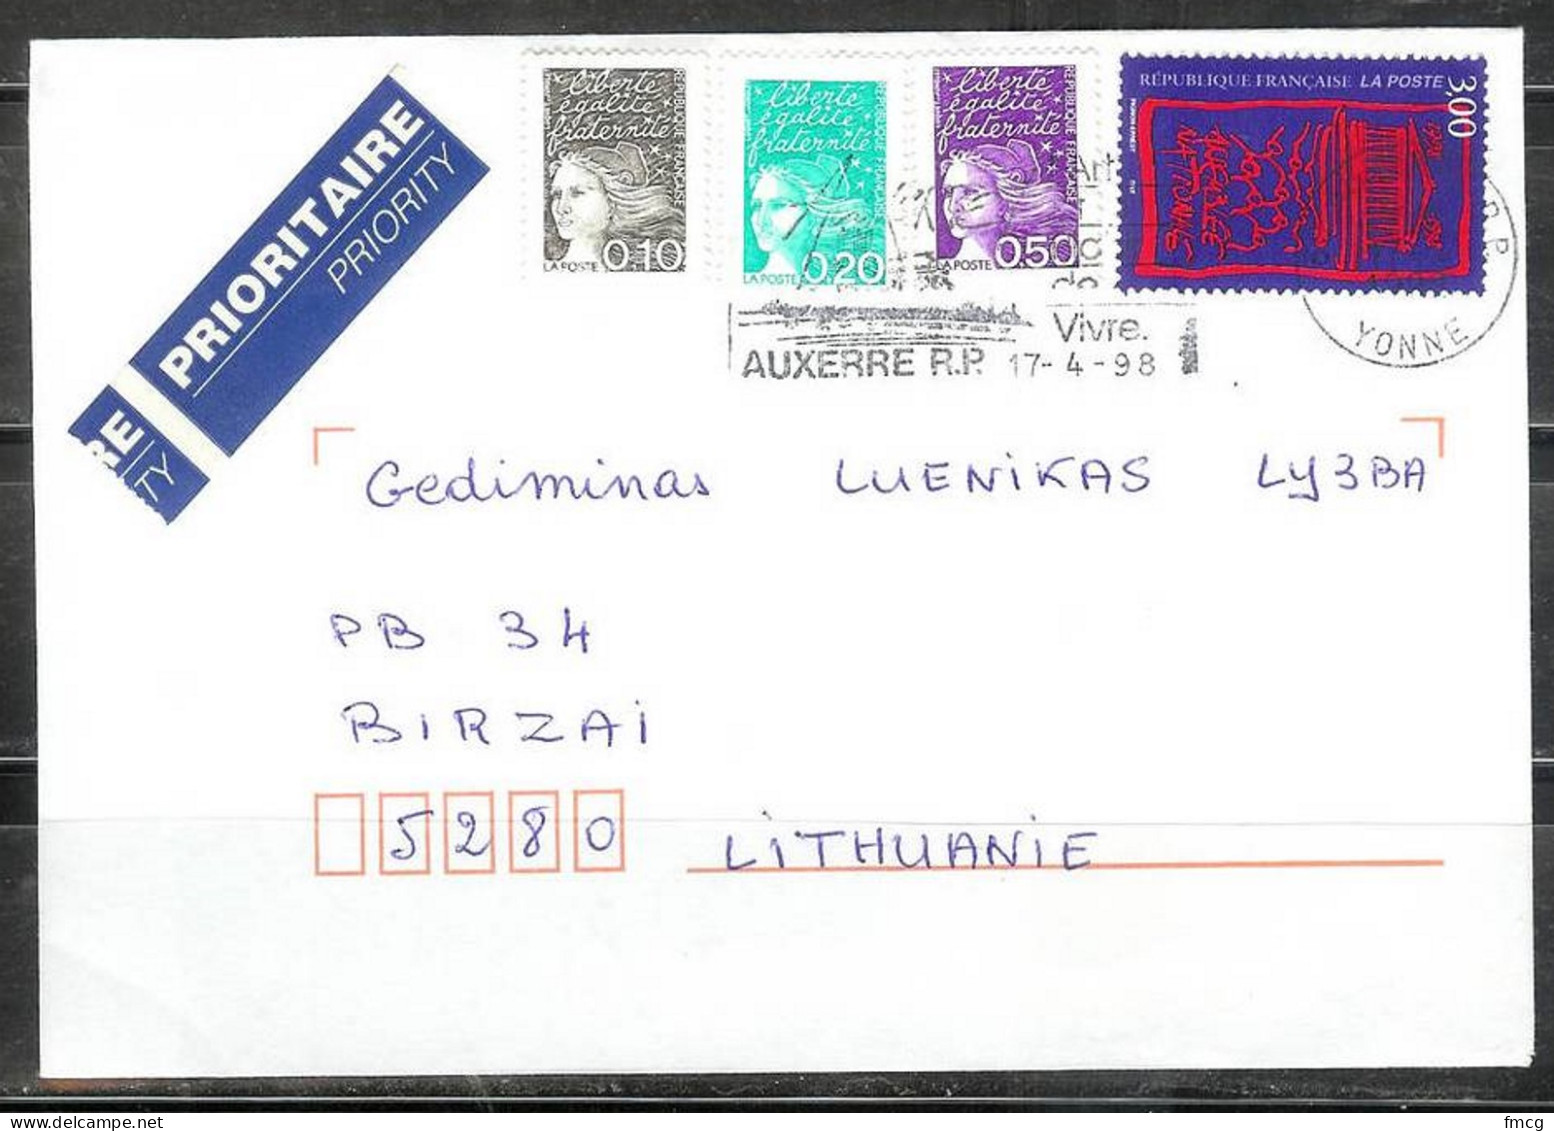  1998 National Assembly, Auxerre (17-4-98) To Lithuania - Lettres & Documents